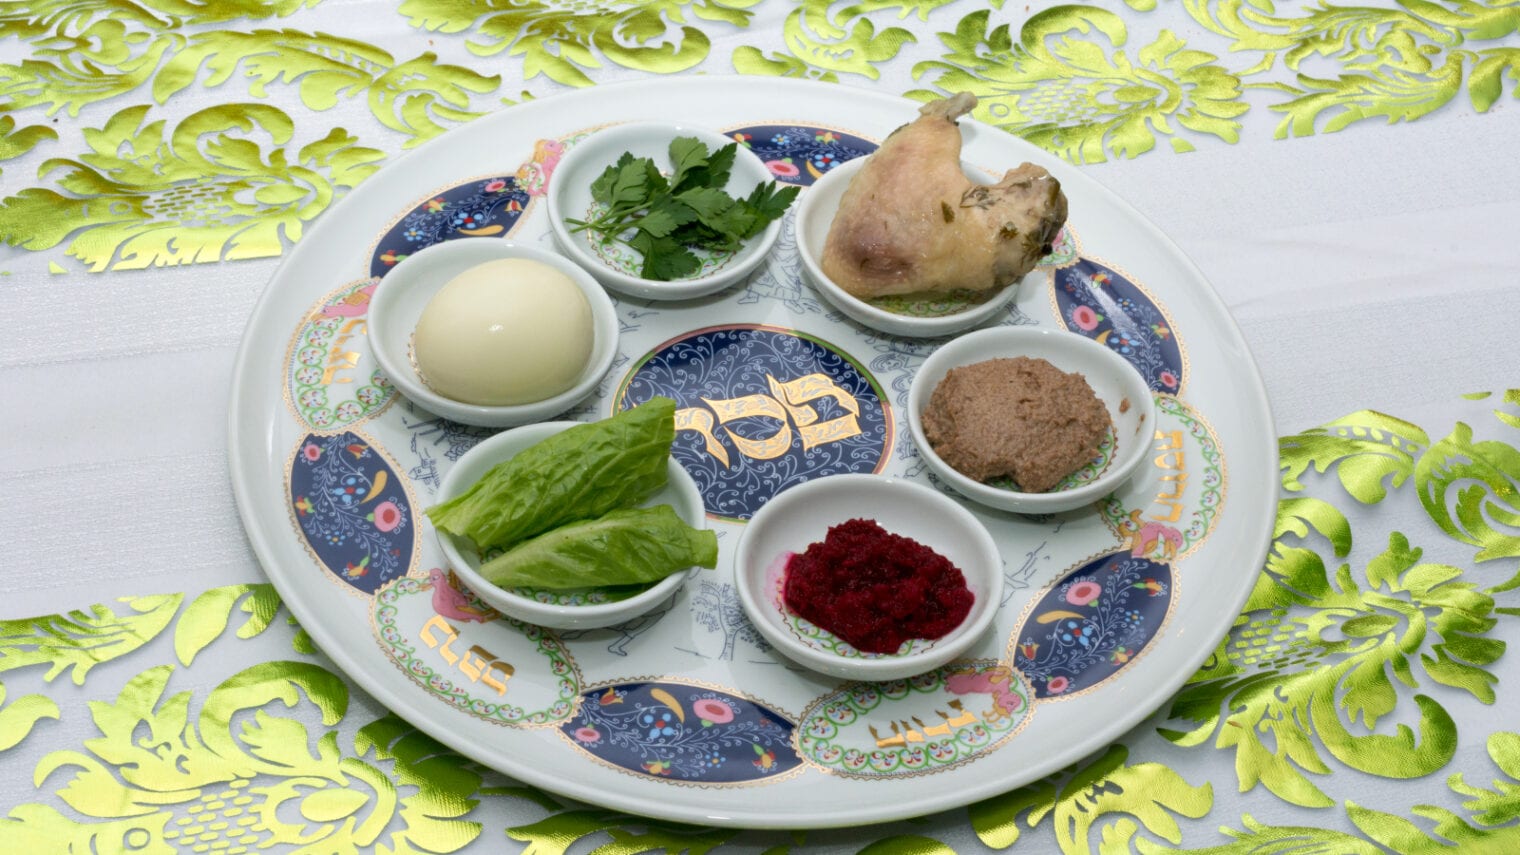 Traditional Passover Seder plate with six items that have significance to the retelling of the story of Passover, the focus of this ritual meal. Photo by D. Naveh via Shutterstock.com